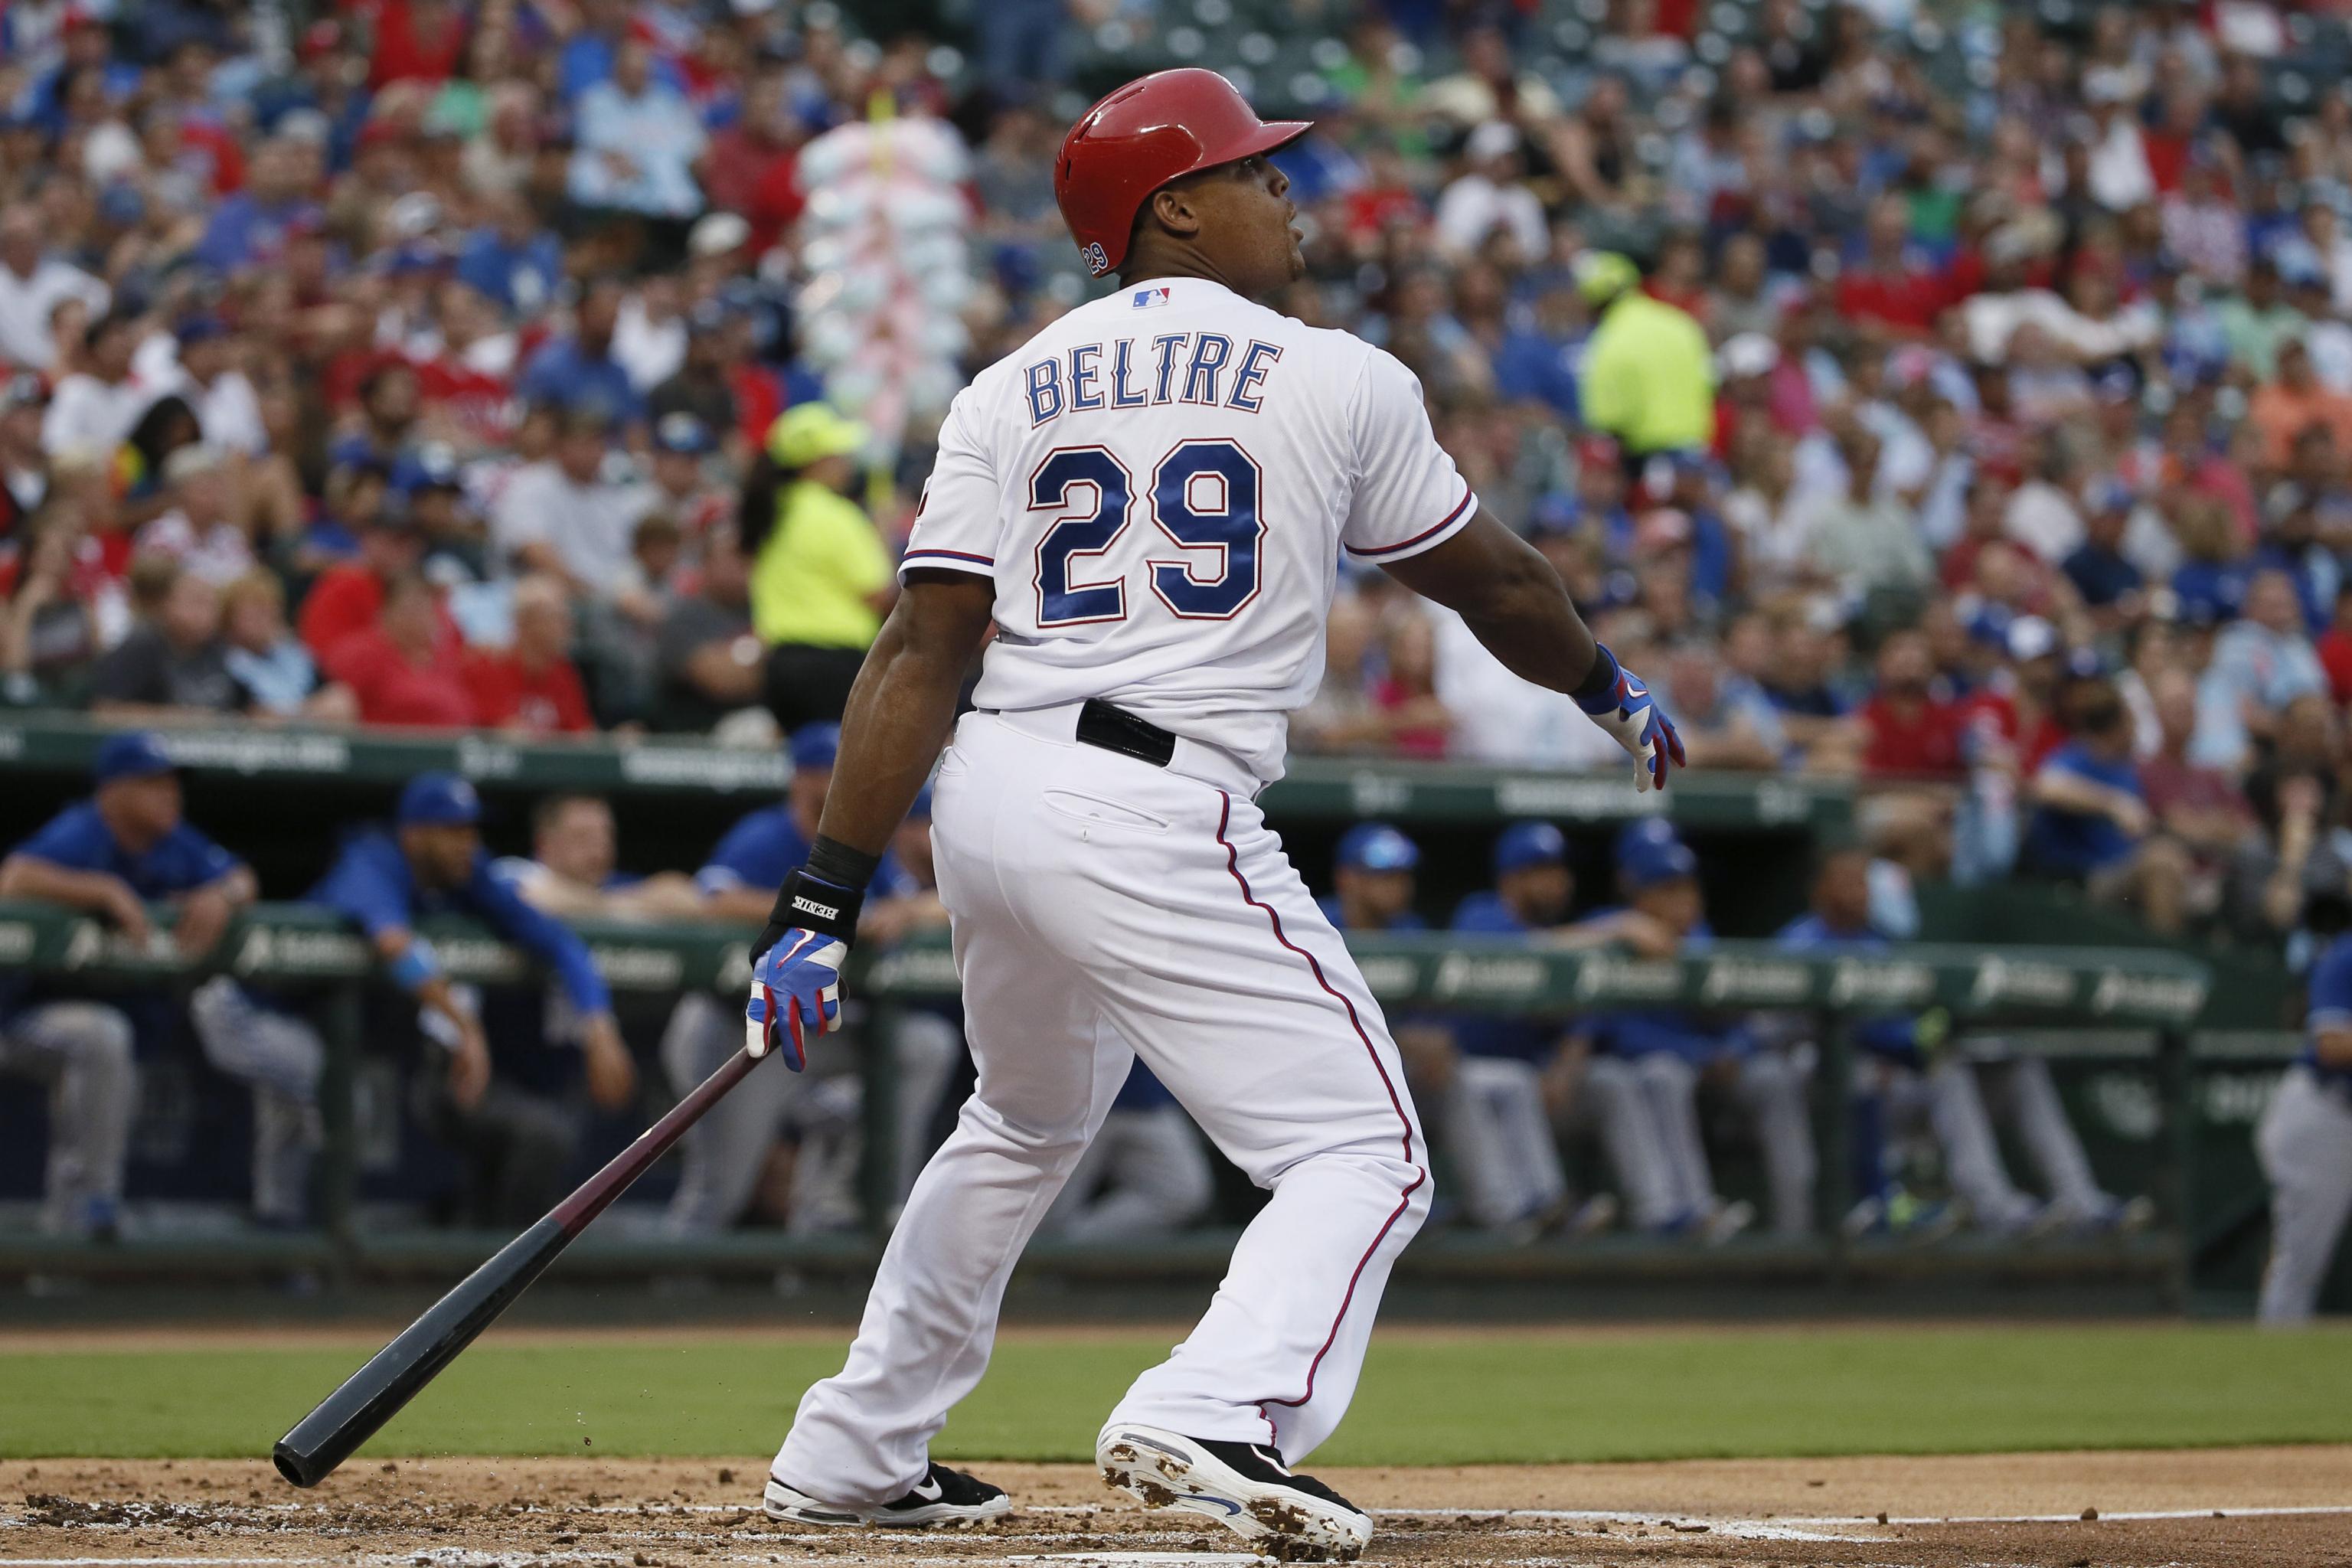 Report: Adrian Beltre signs 2-year extension